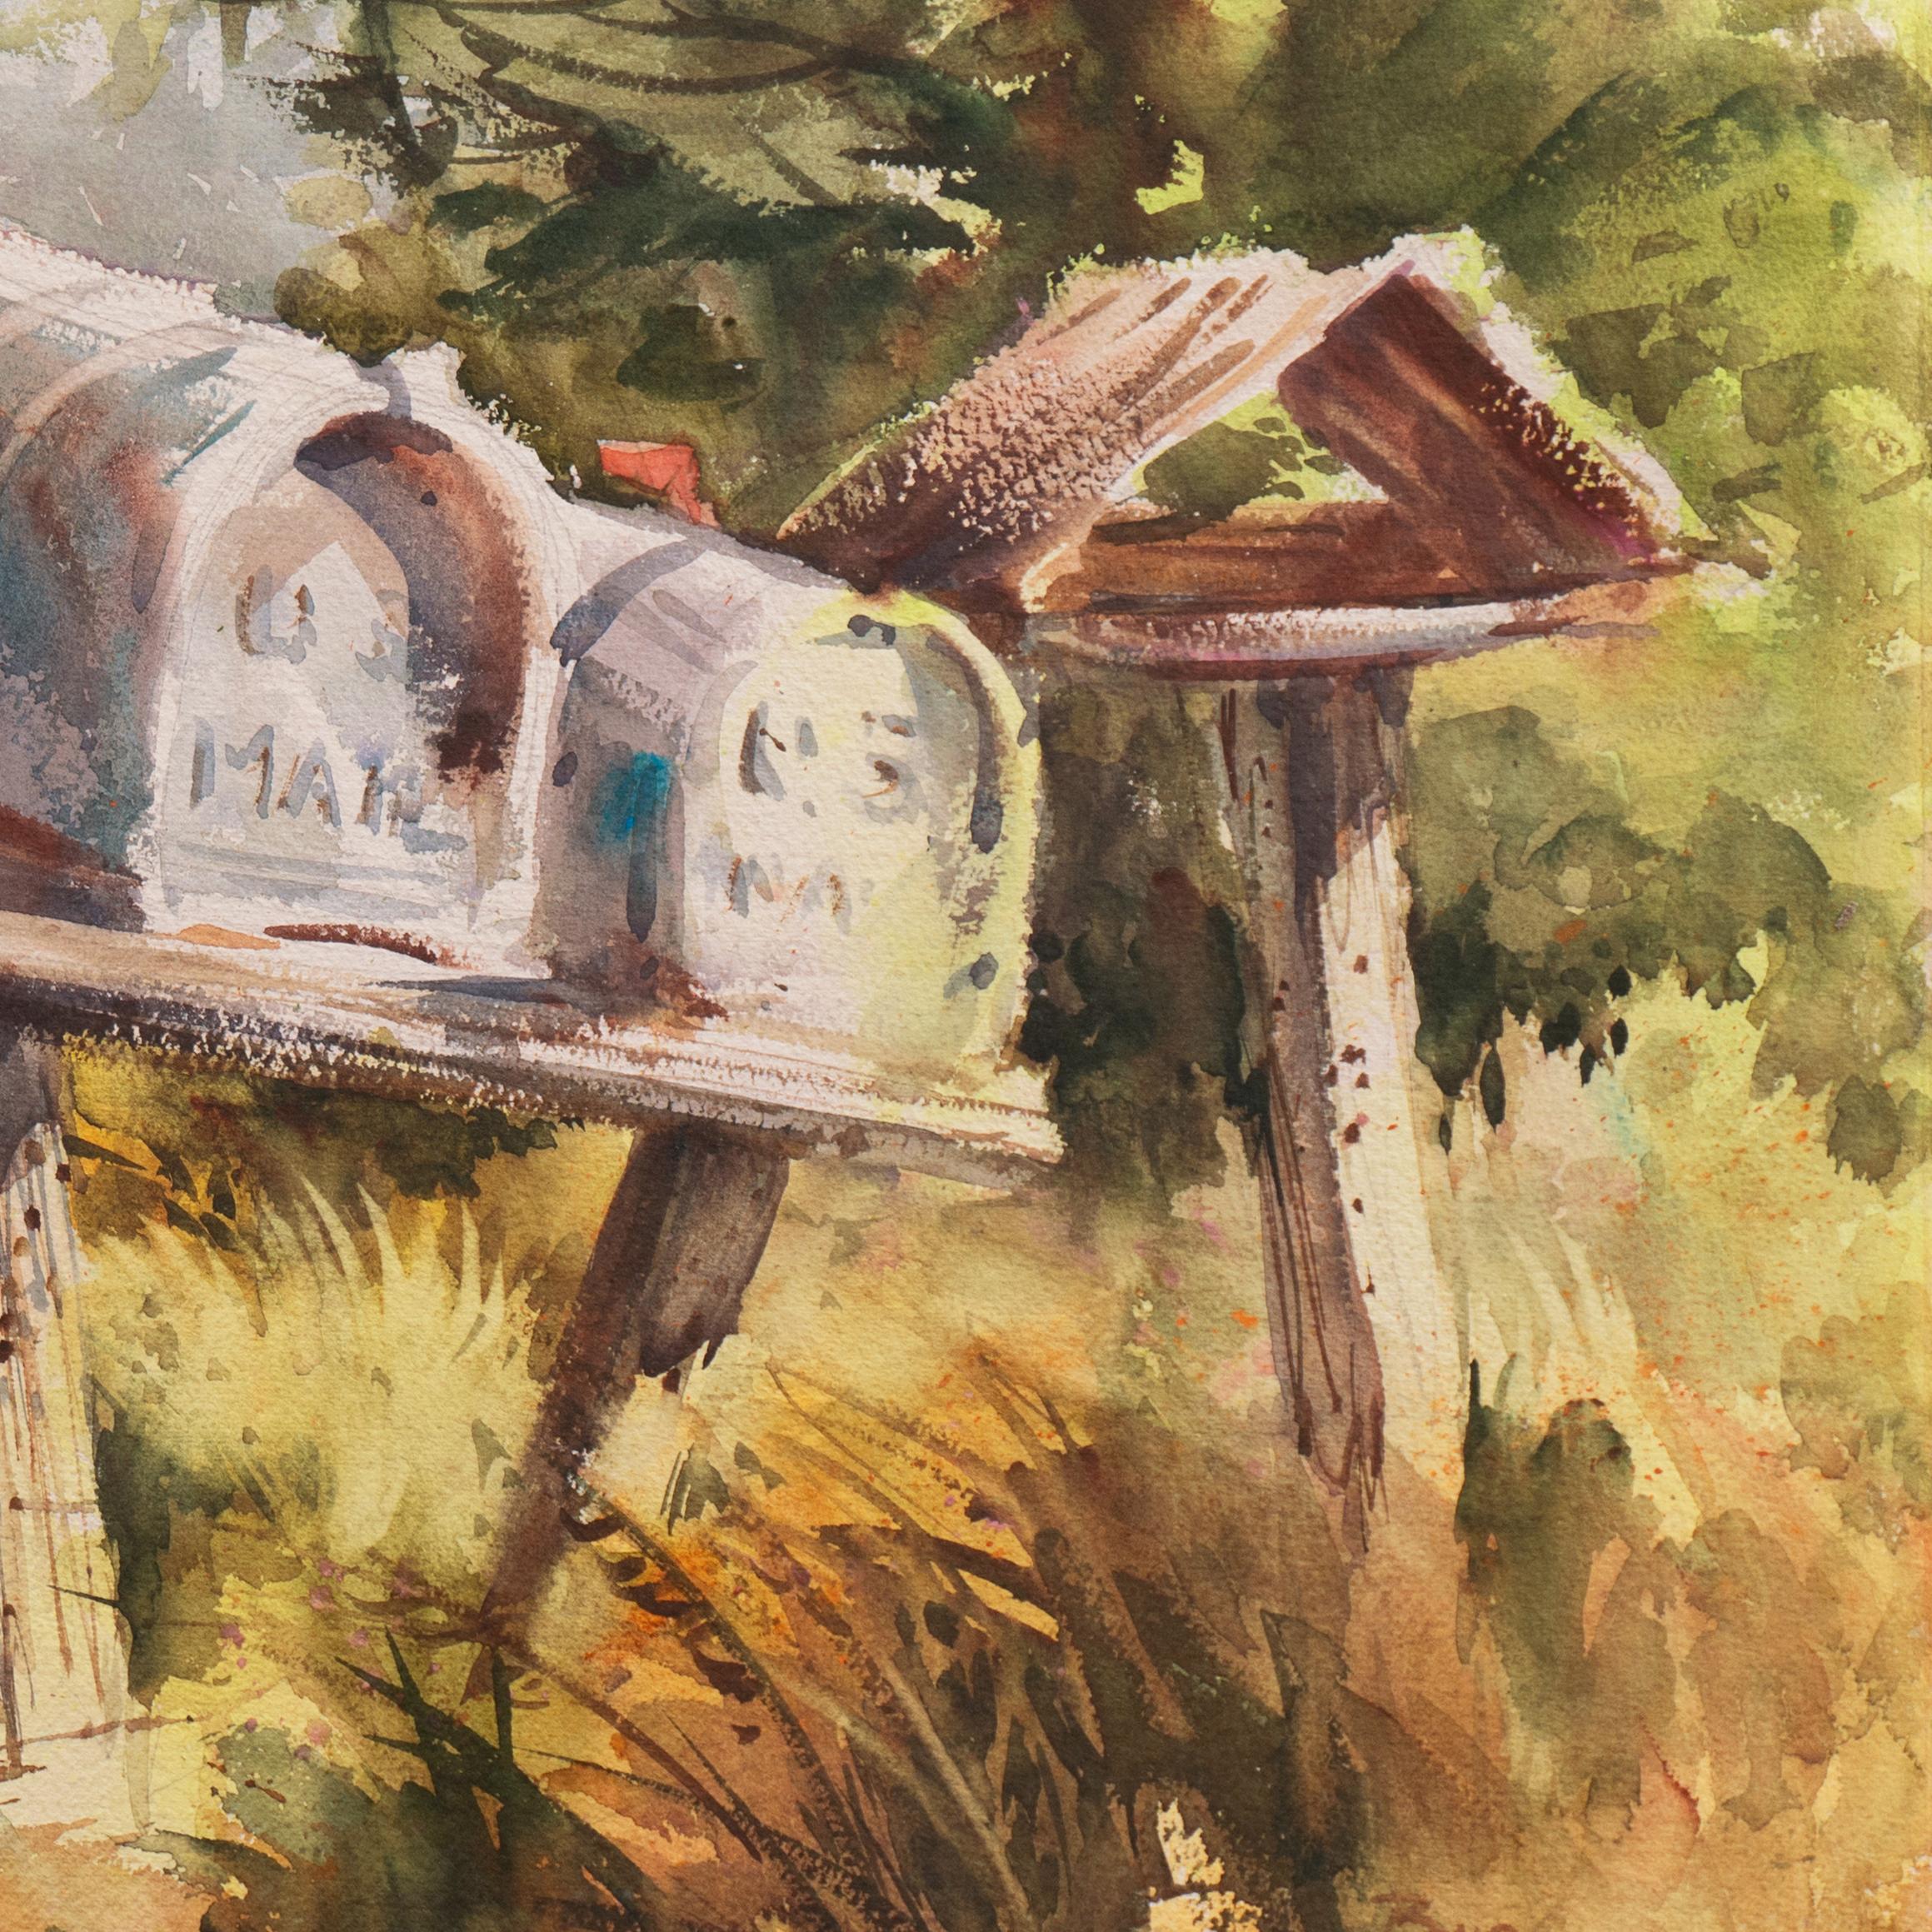 Signed lower right, 'Burnham SWA' for Jane Burnham Crawford (American 1926-2016) and painted circa 1985.

A substantial and loosely painted view of five dilapidated mail boxes standing on the verge of a rural road among overgrown grasses and